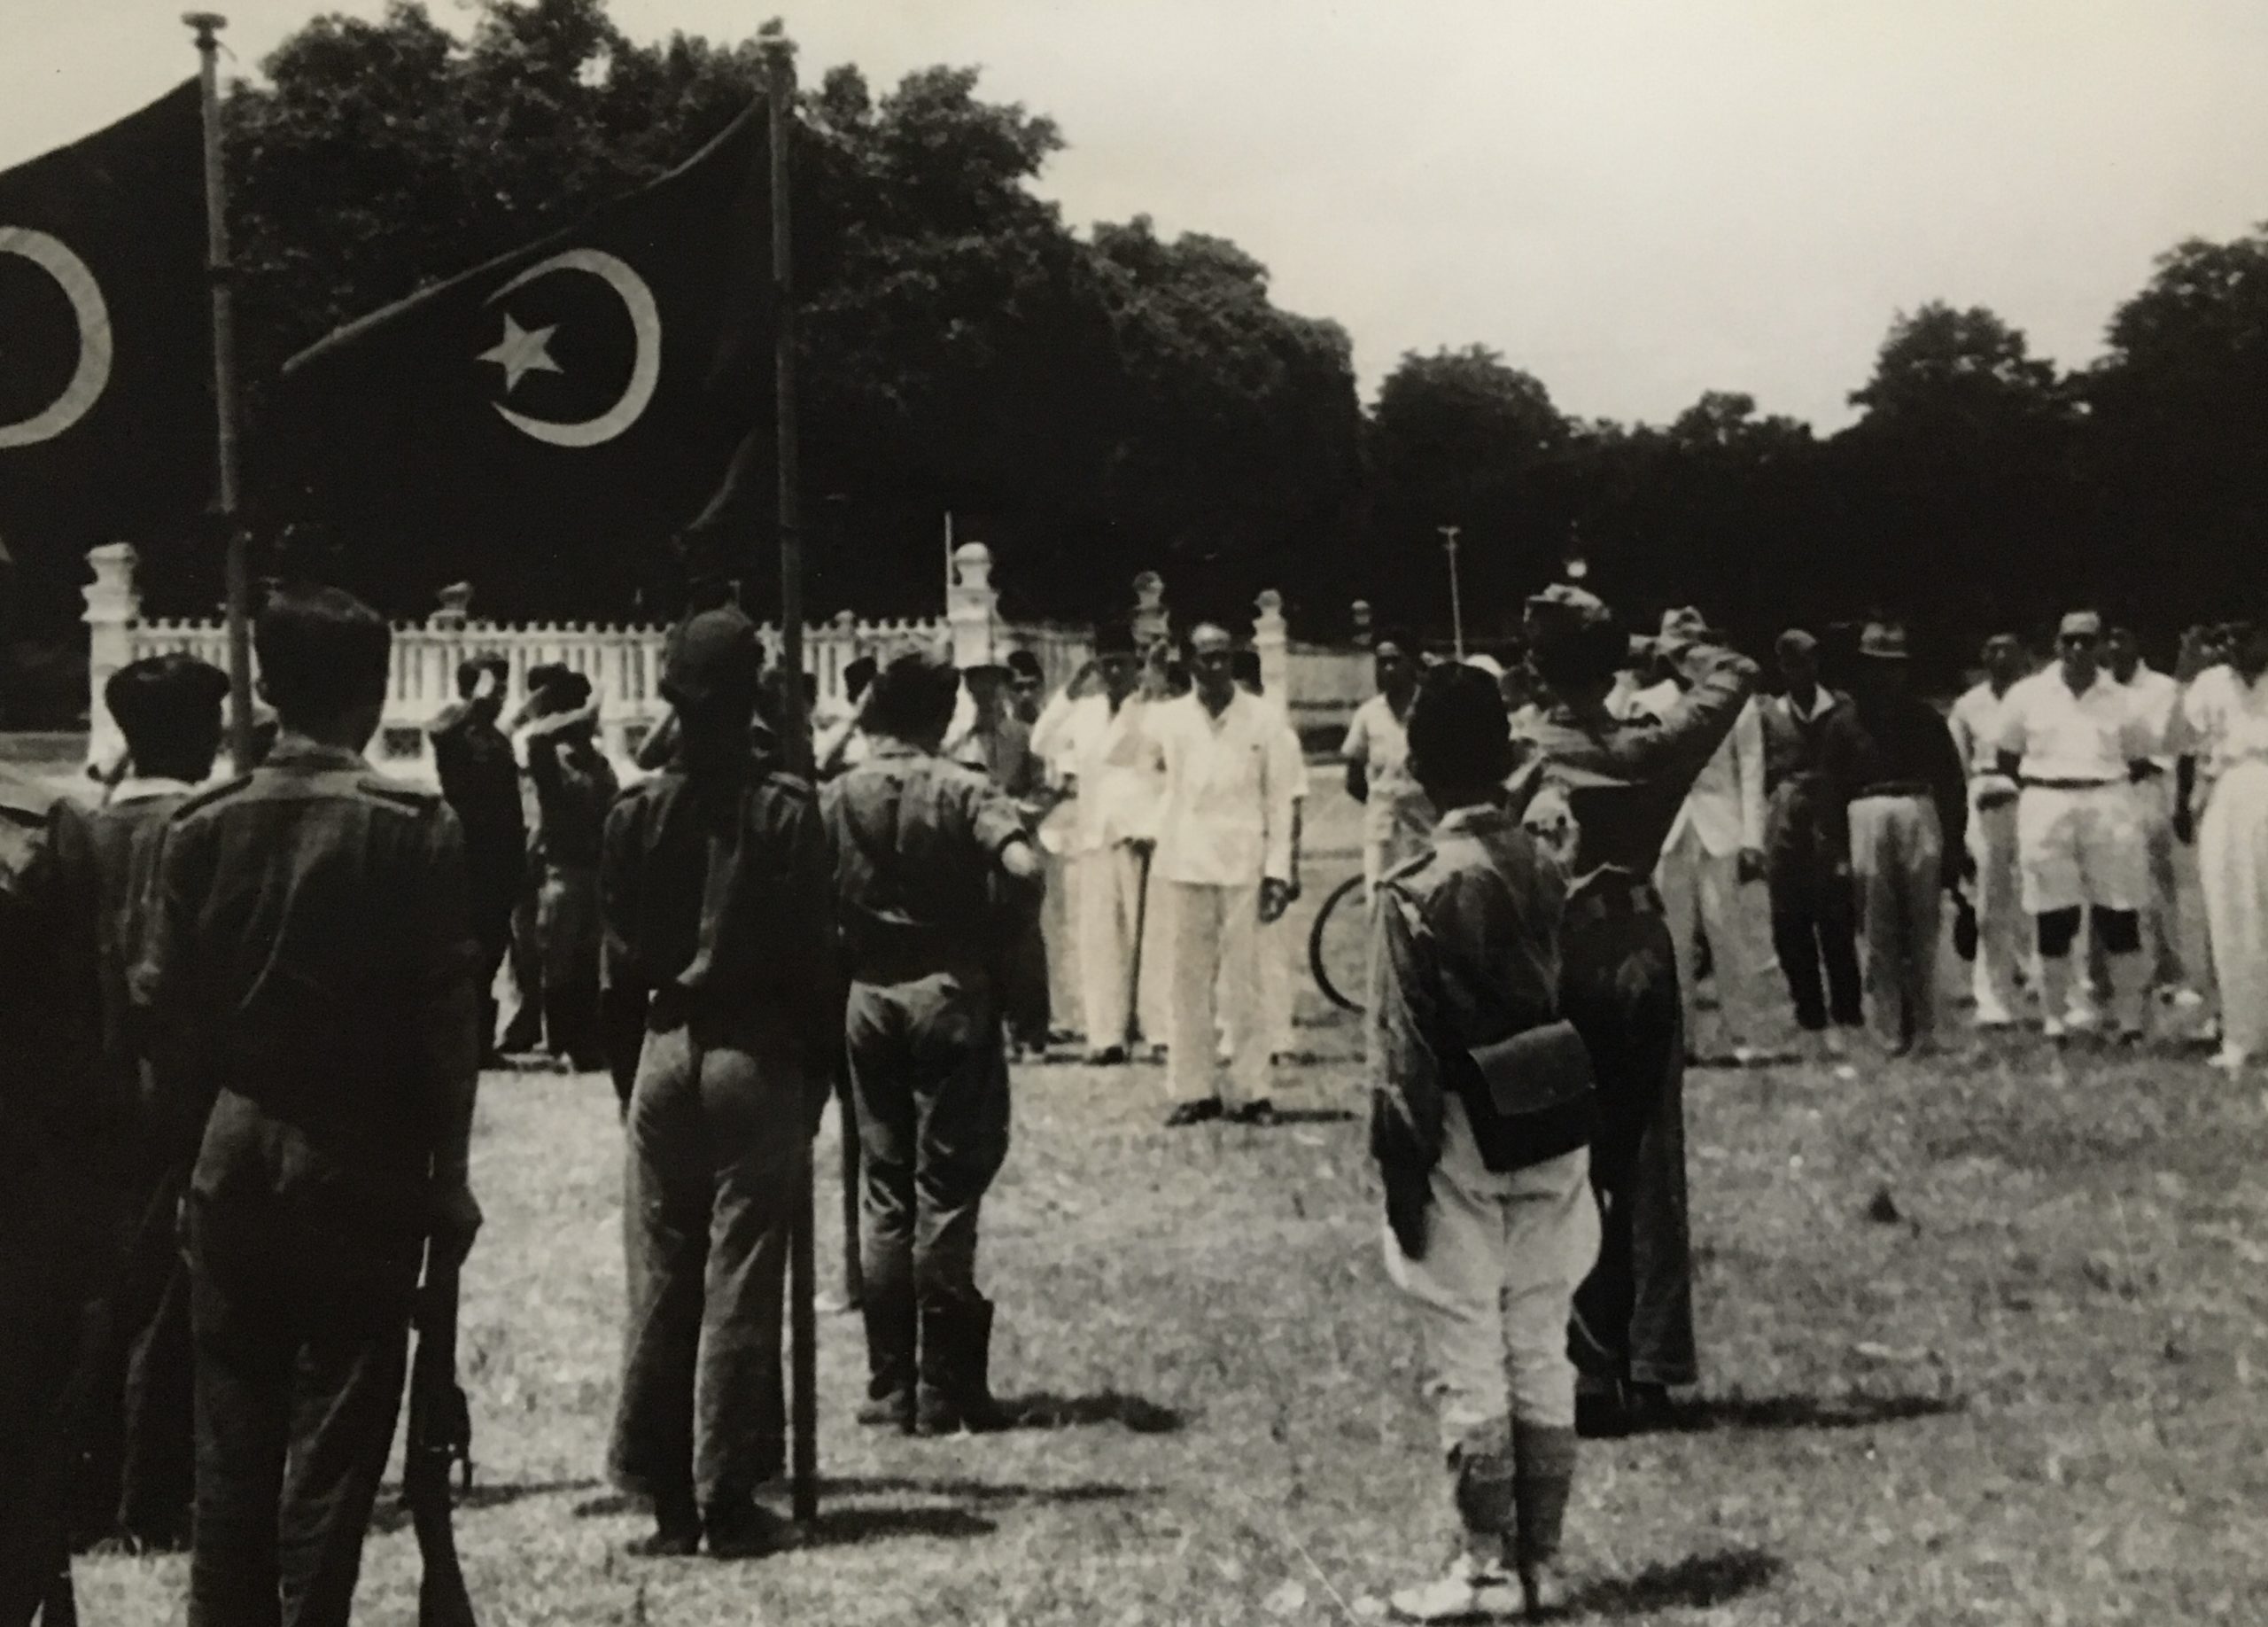 An Islamic militia in Indonesia during the Revolution, 1946